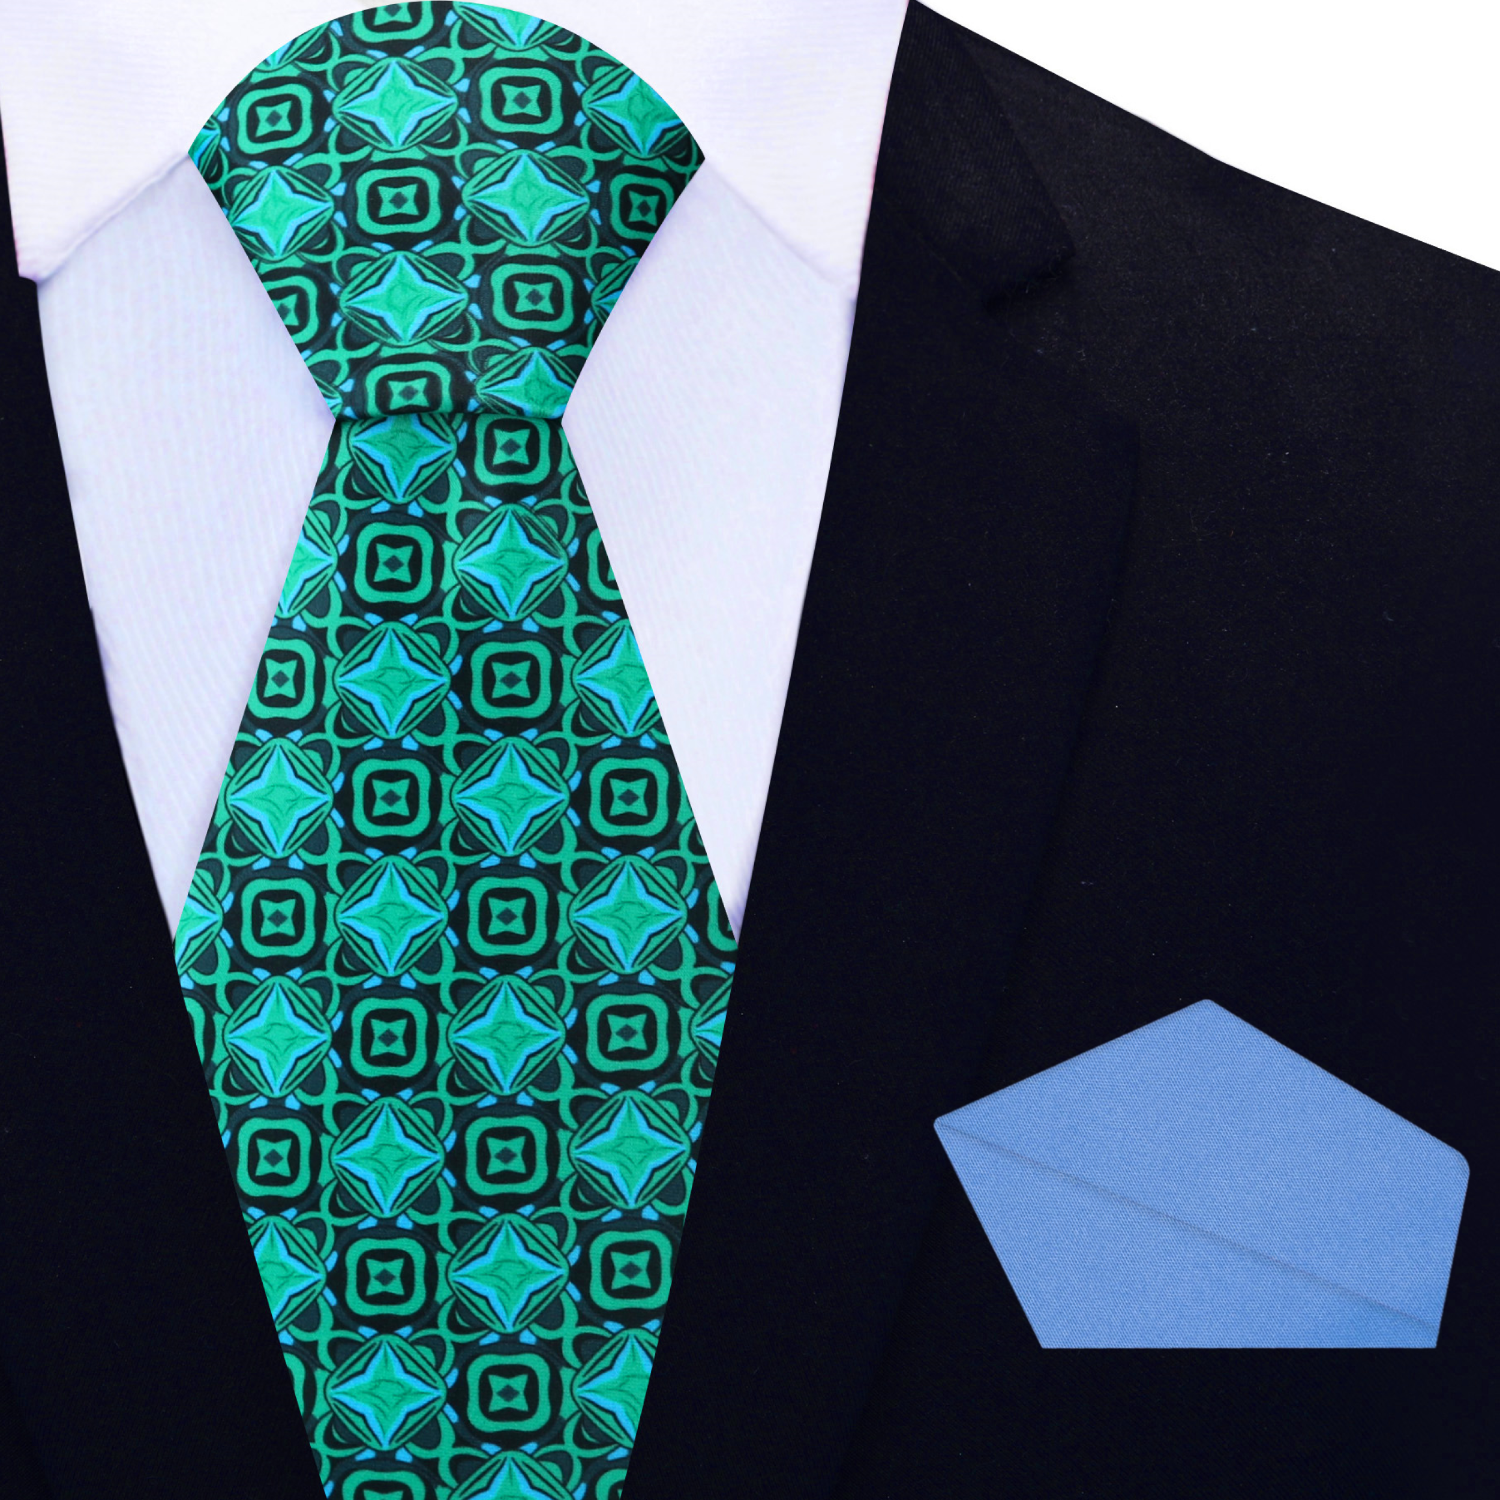 View 2: Green Geometric Tie and Light Blue Square